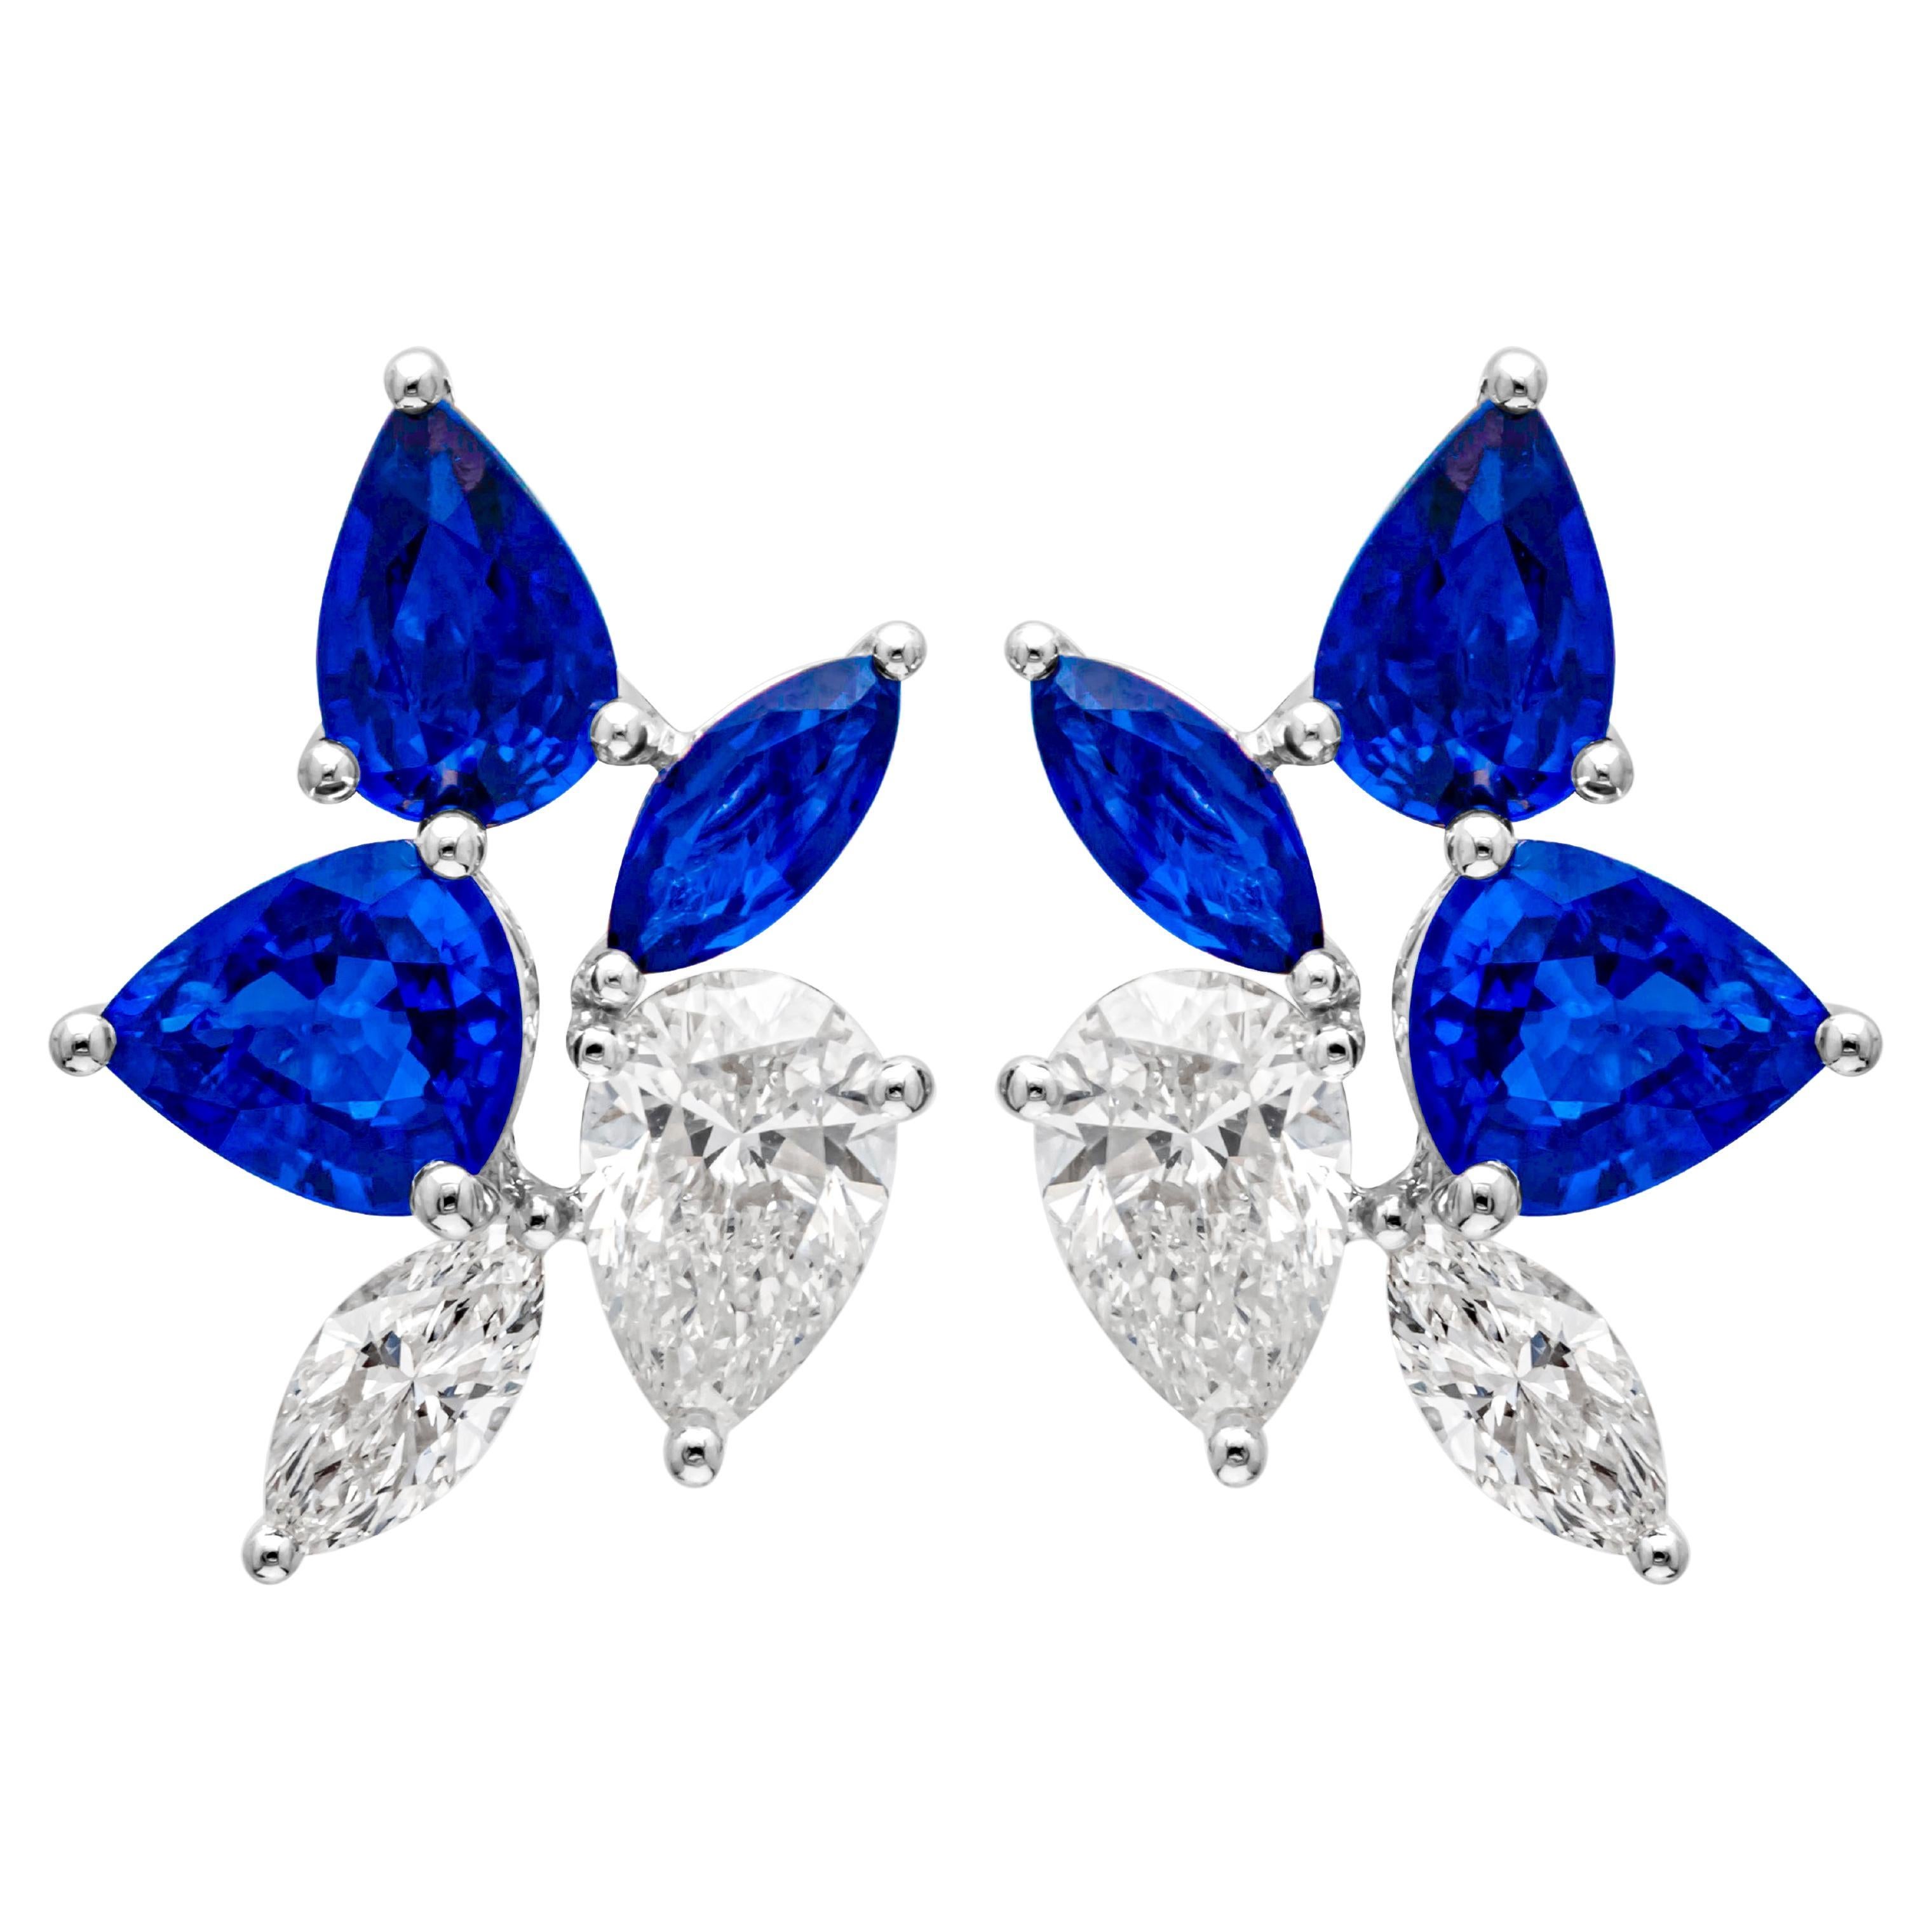 4.08 Carats Total Mixed Cut Blue Sapphire & Diamond Stud Earrings For Sale